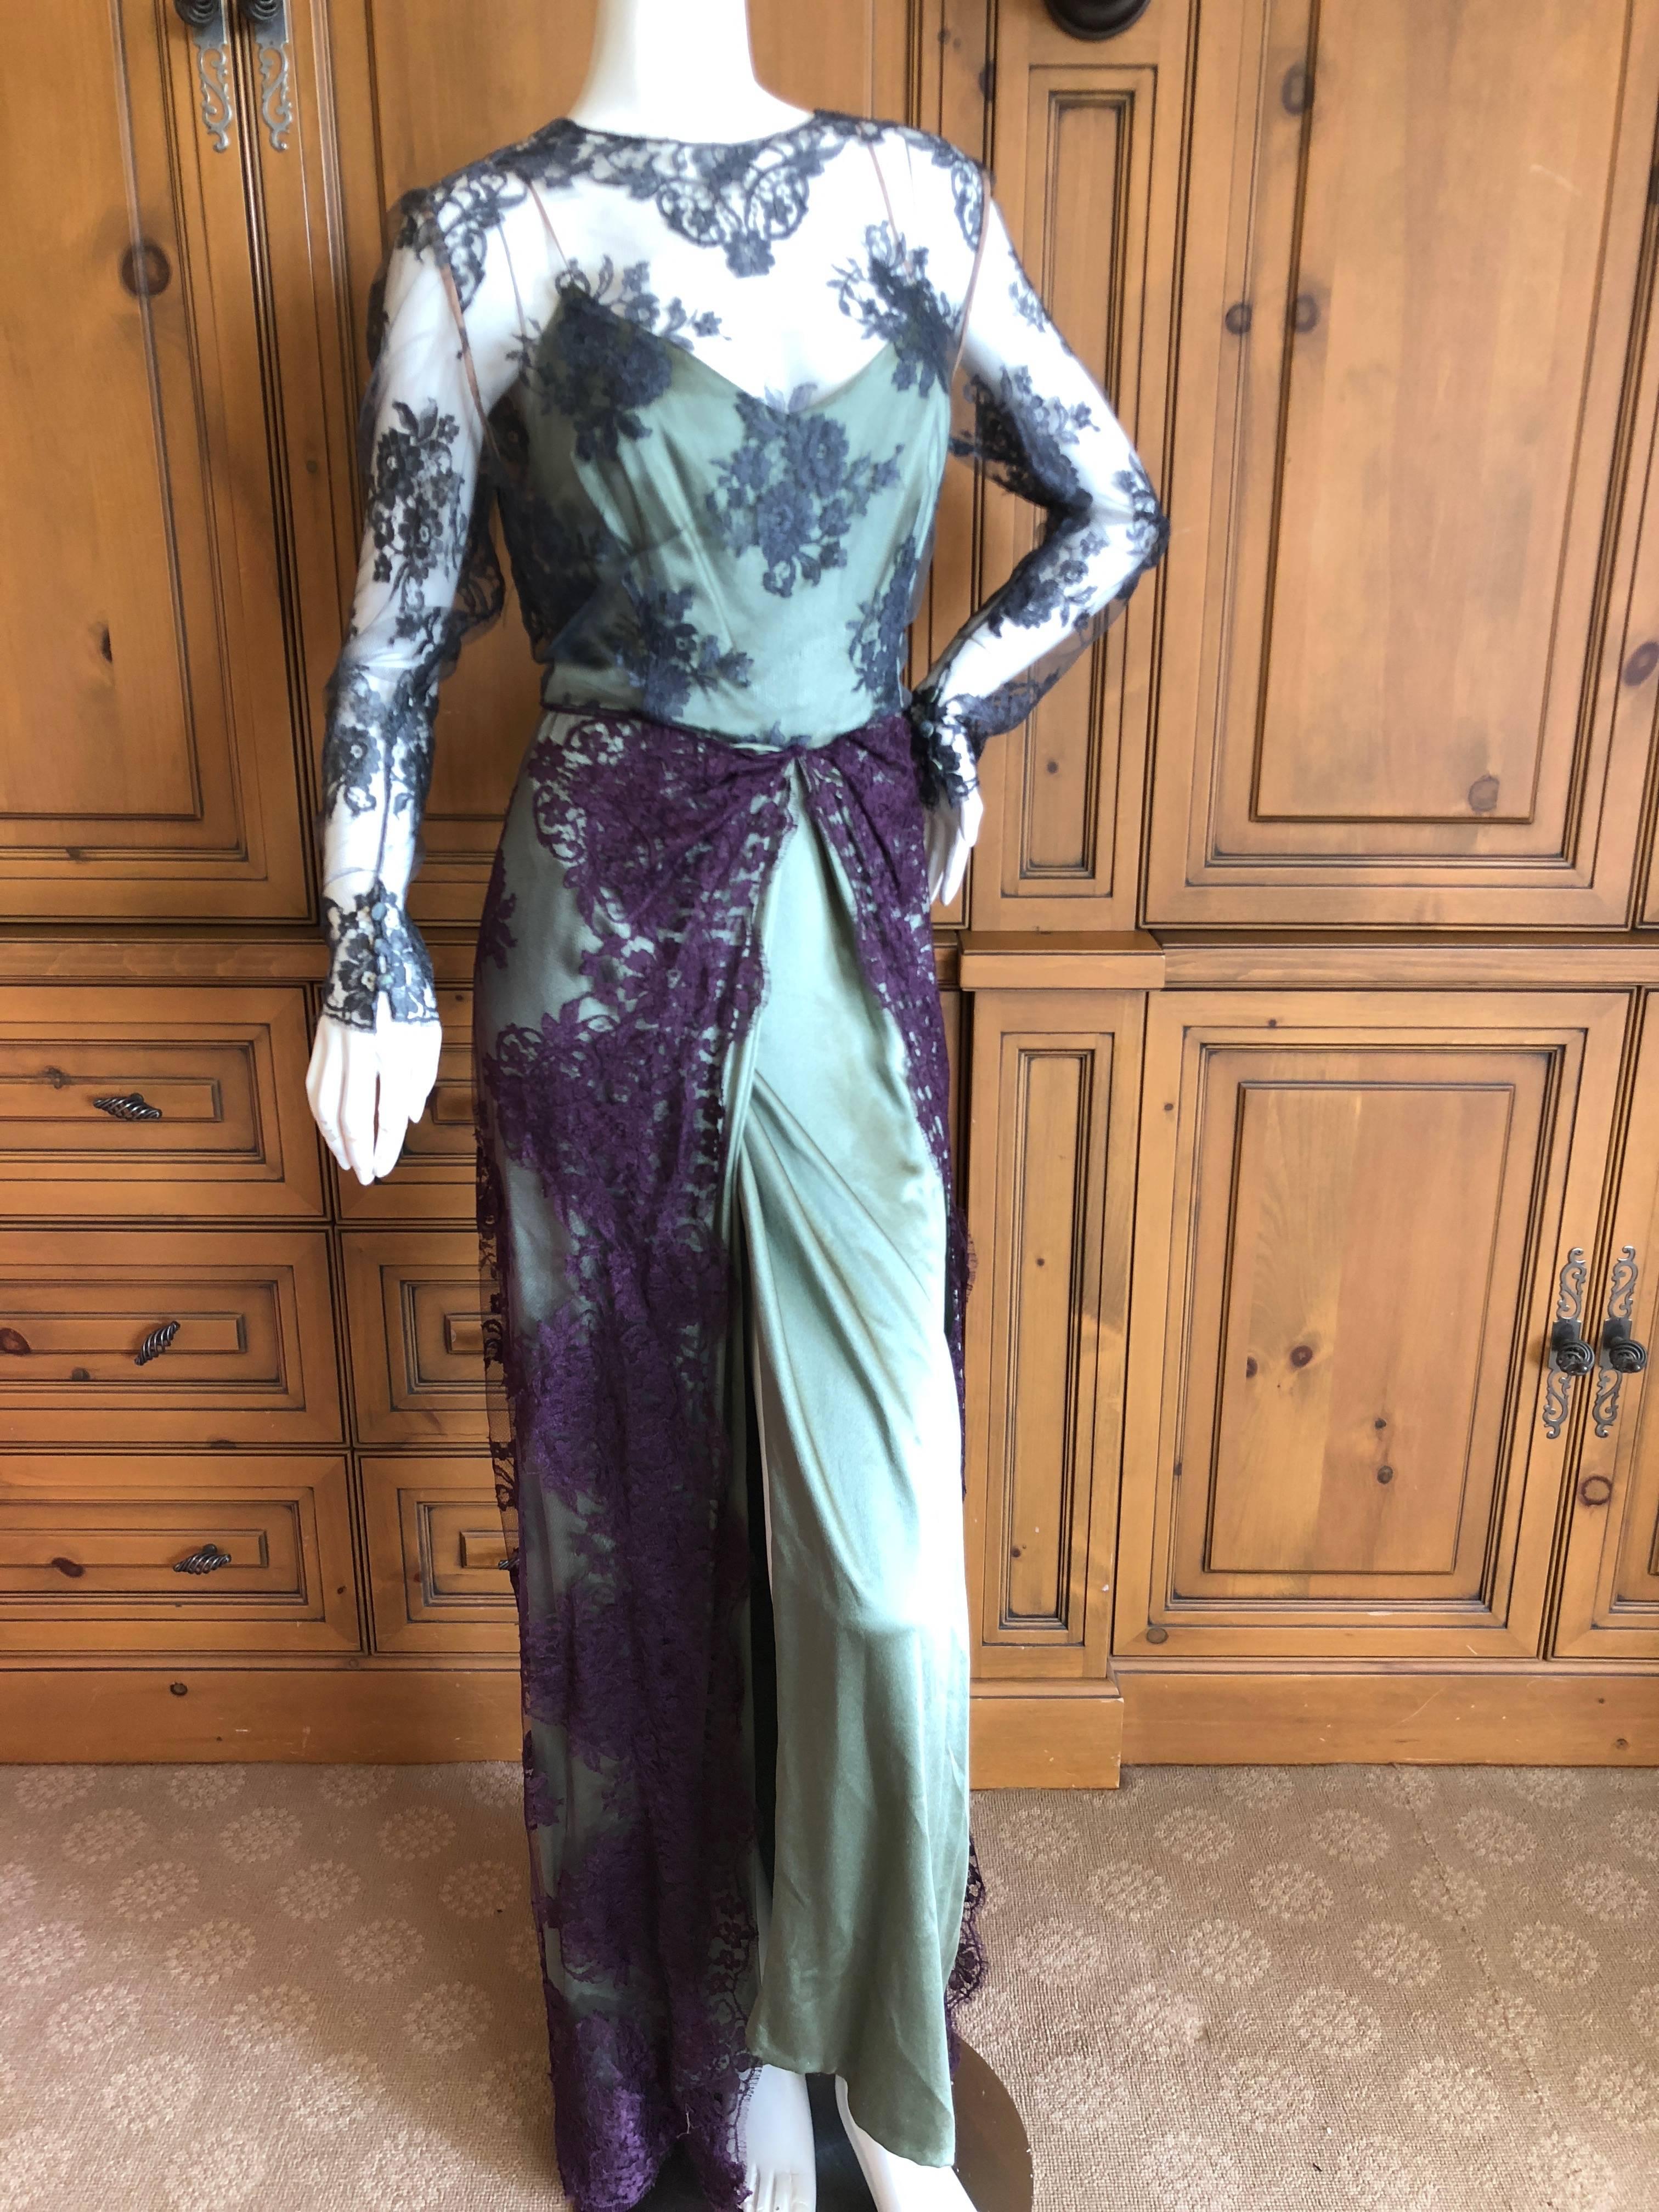 Women's Bill Blass Vintage 1970's Silk Evening Dress with Lace Overlay Details For Sale